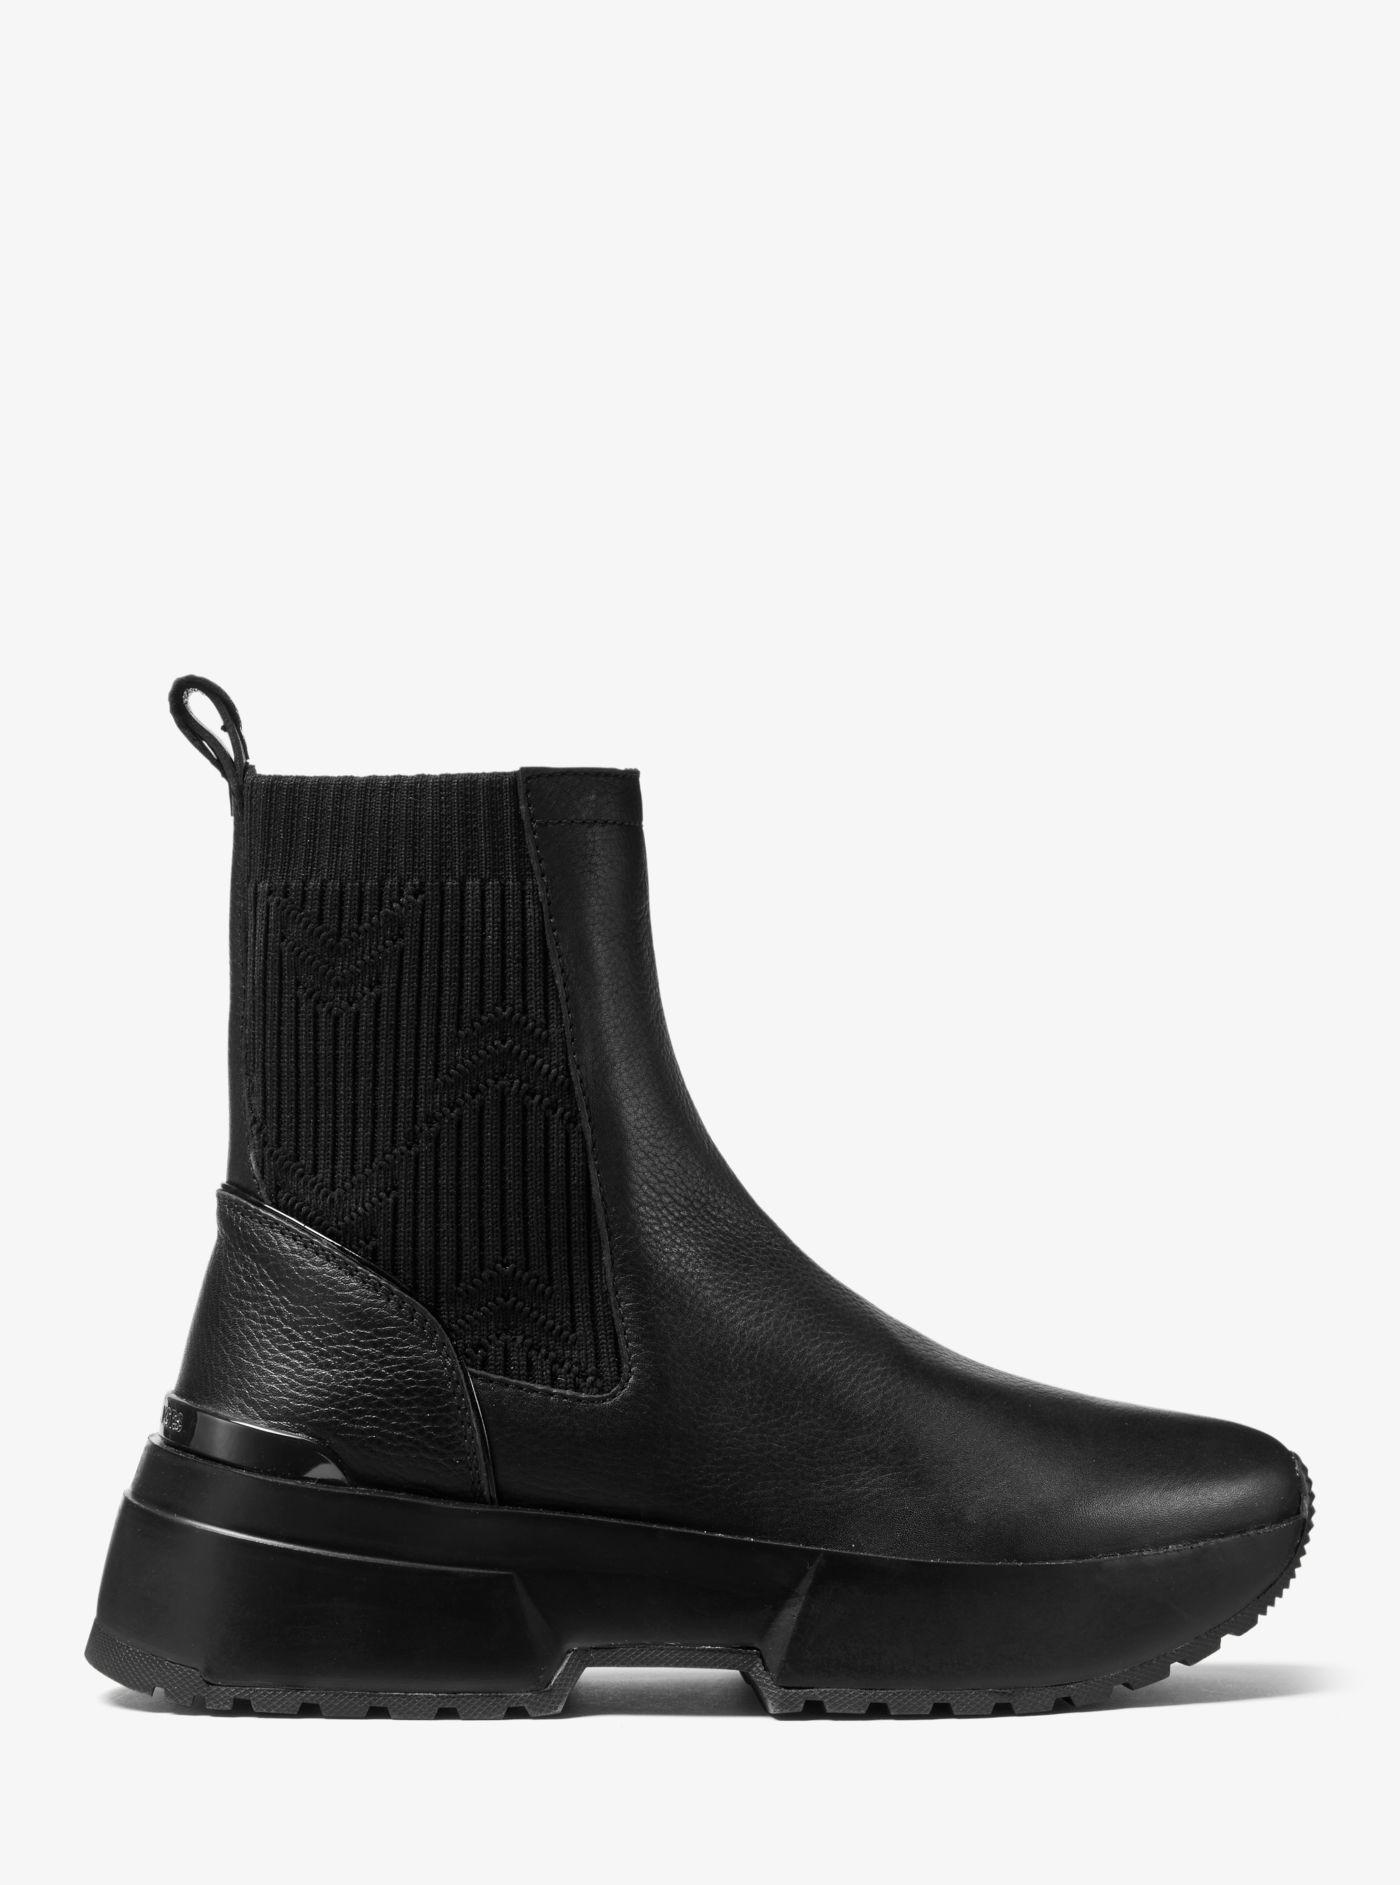 Michael Kors Cosmo Leather Sneaker Boot 